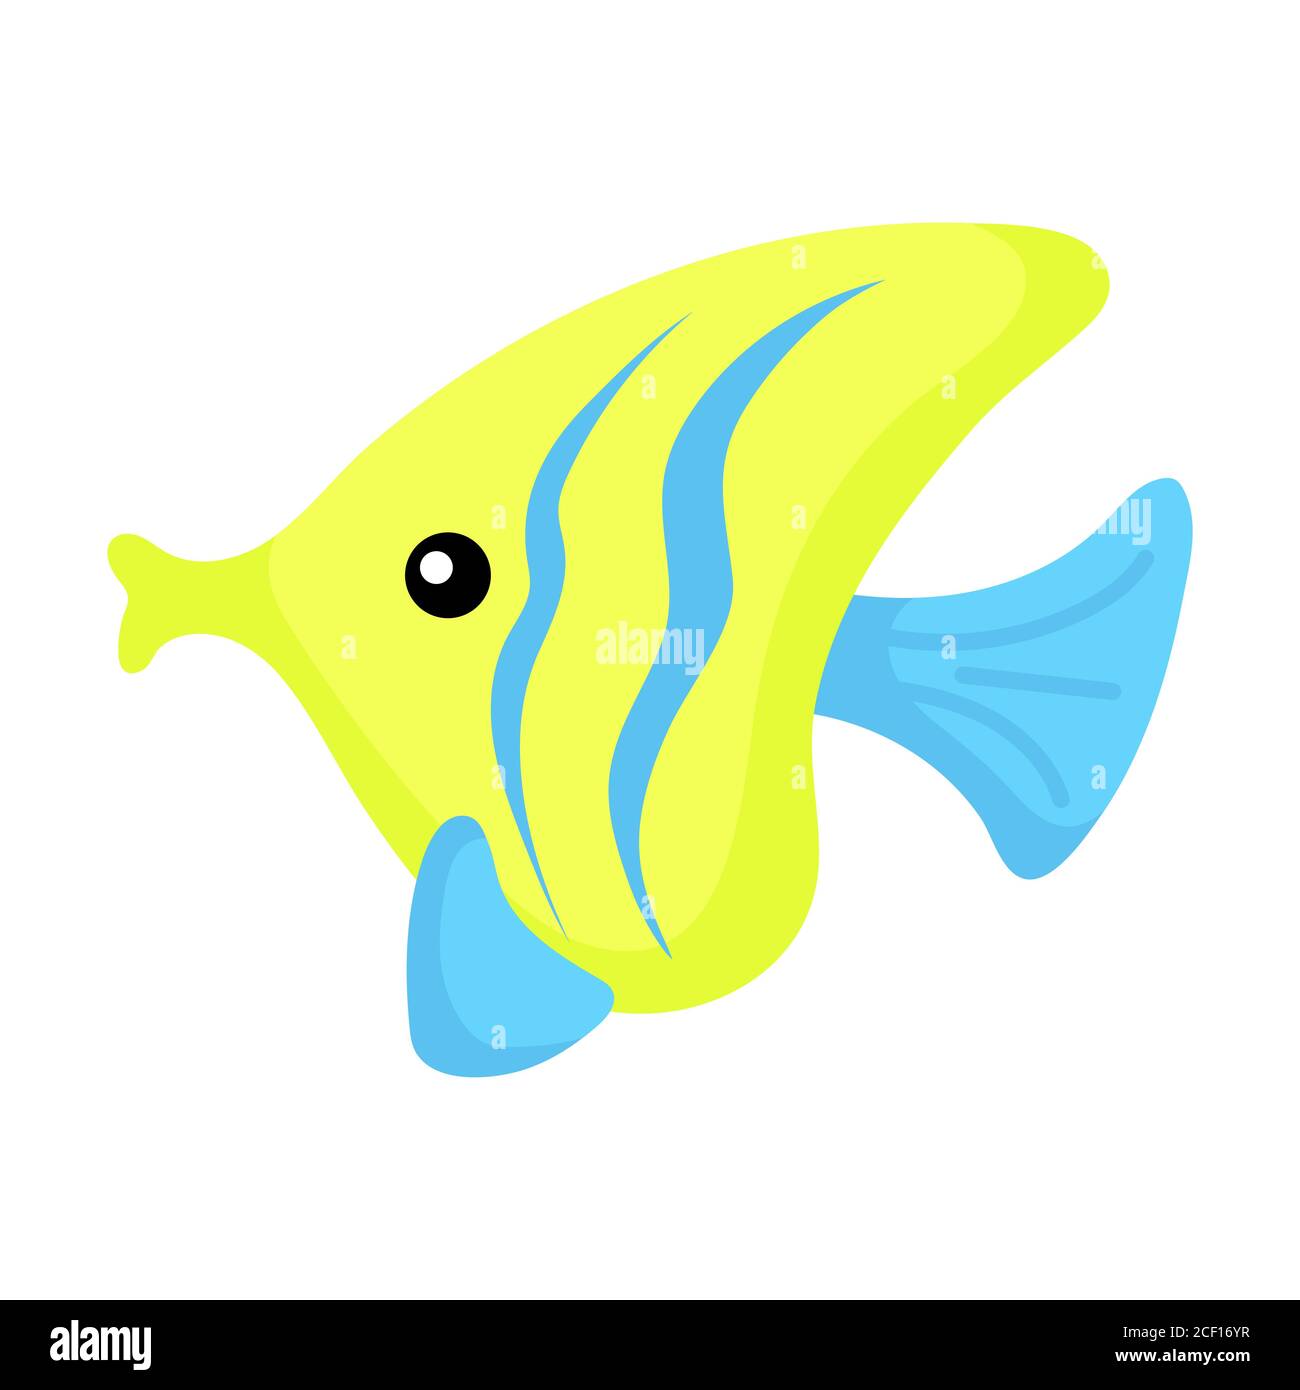 Cute funny yellow fish print on white background. Ocean cartoon